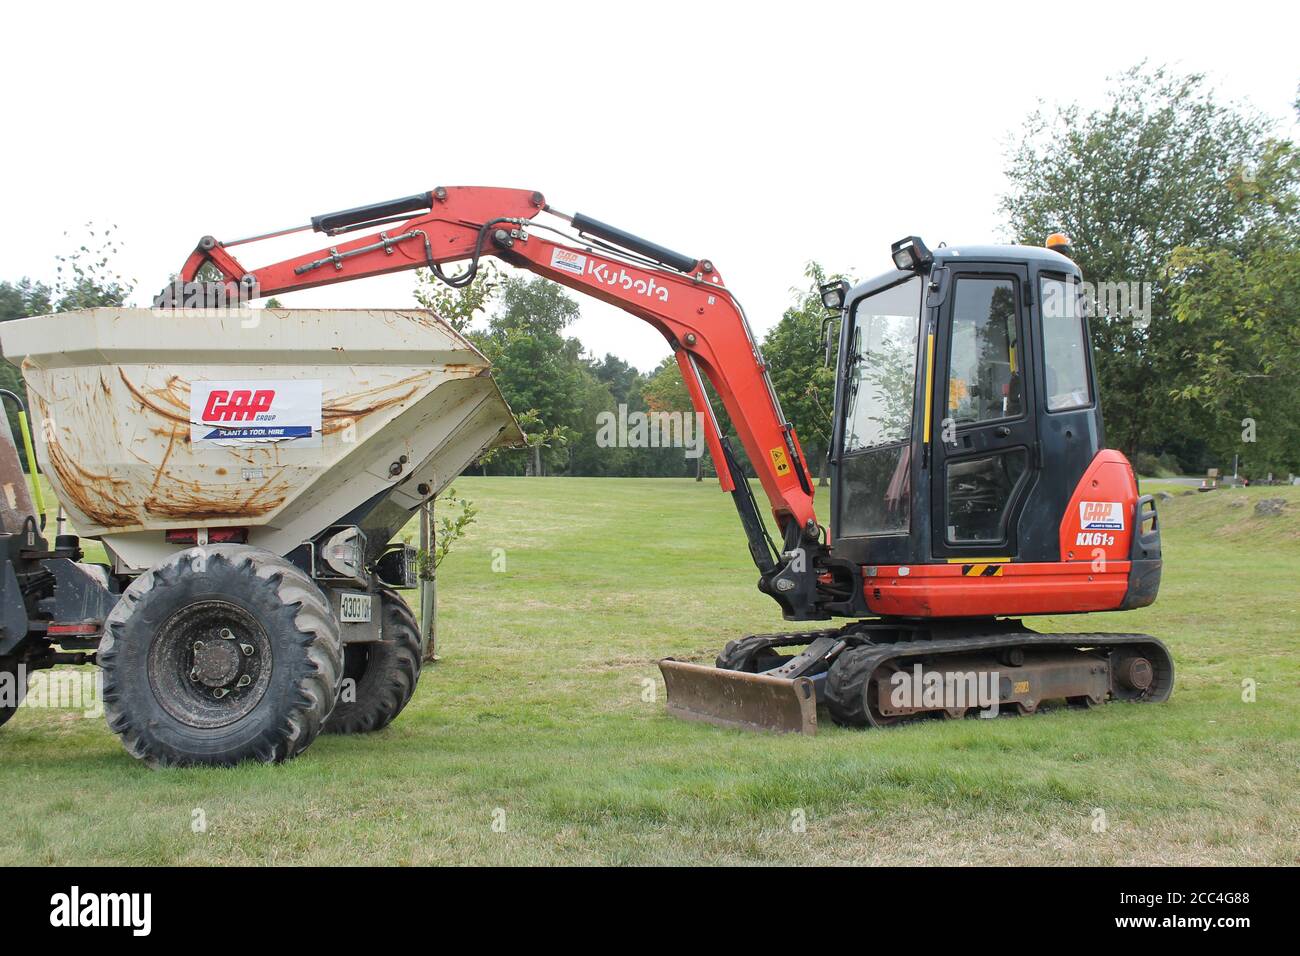 Mini digger with bucket in back of dumper truck, with copy space Stock Photo